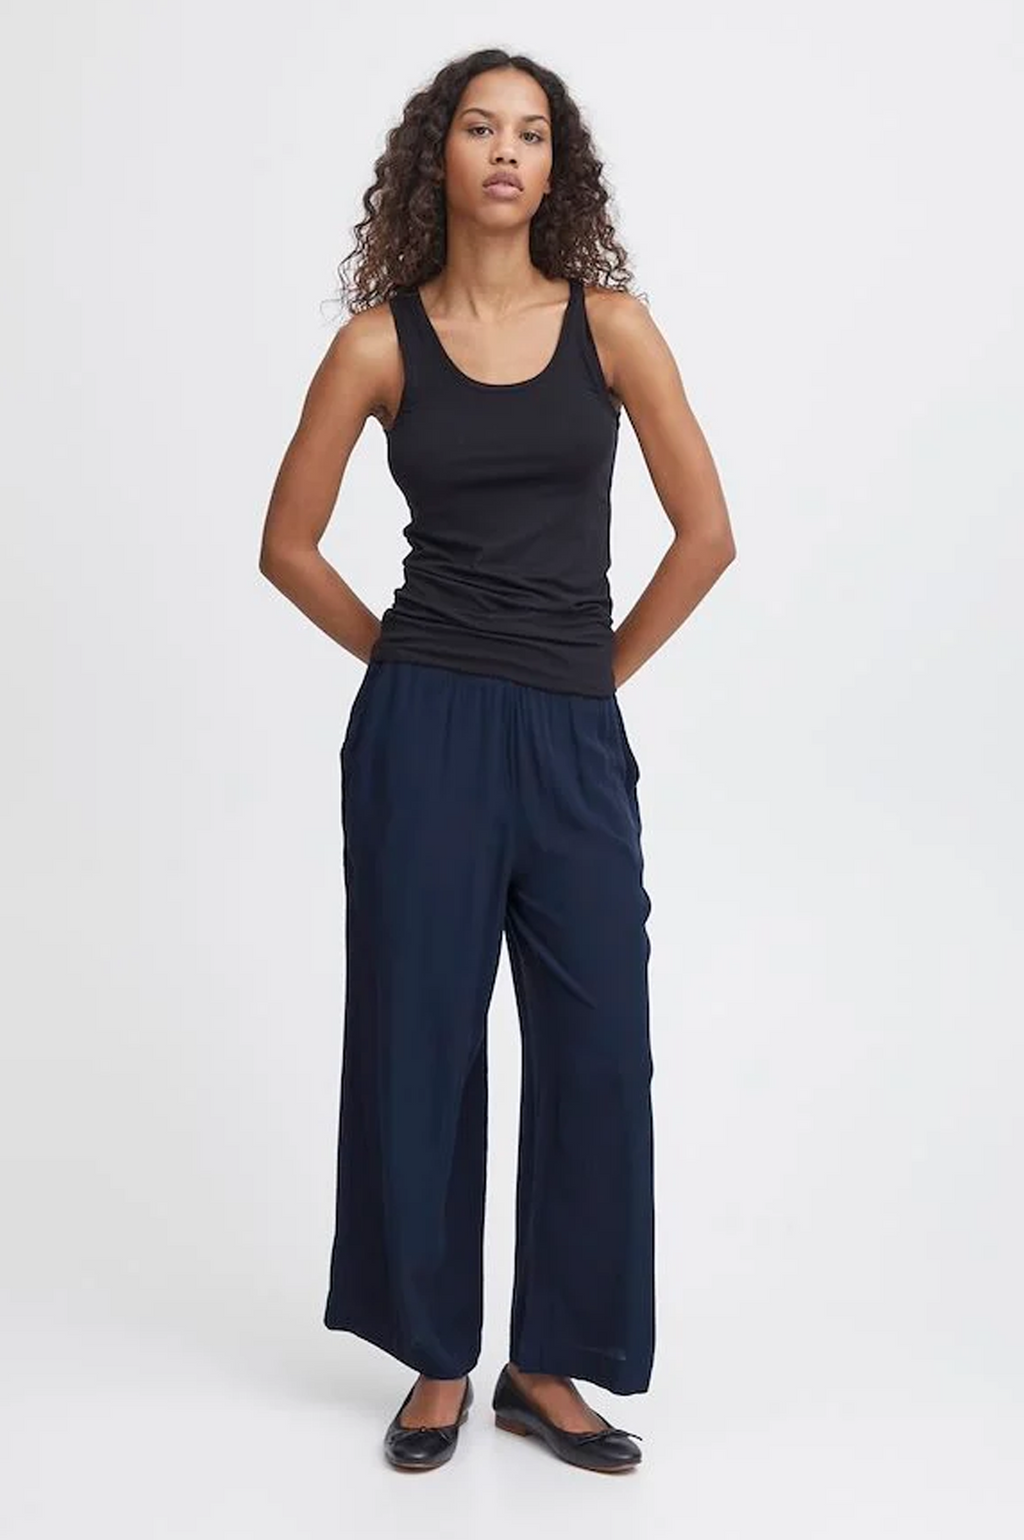 ICHI Marrakech Total Eclipse Trousers - The Mercantile London